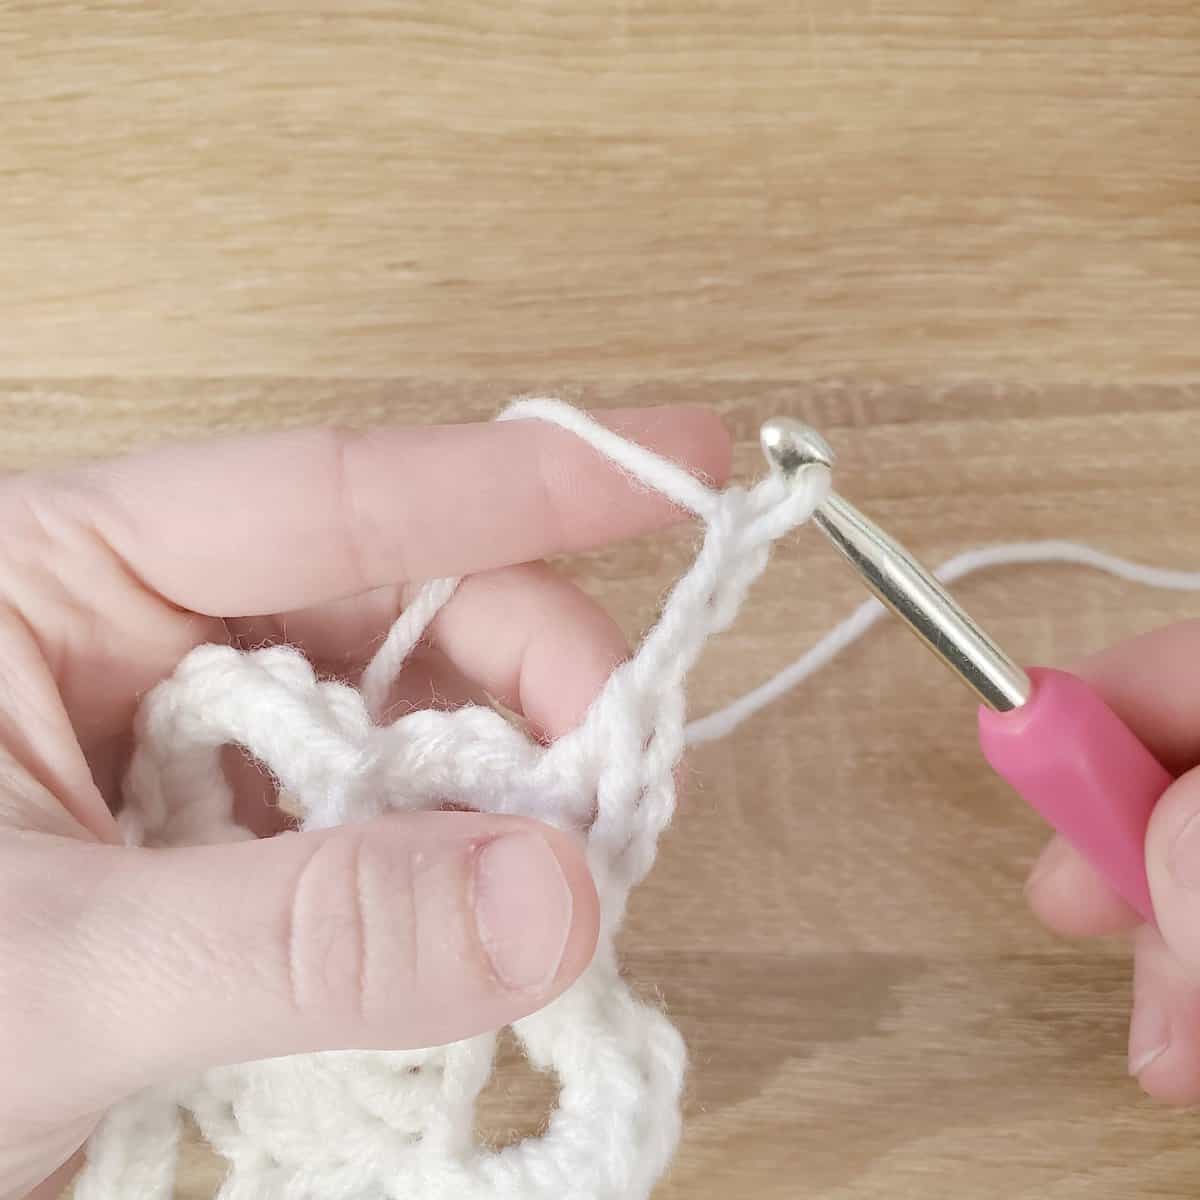 adding a picot stitch to the top of the double crochet